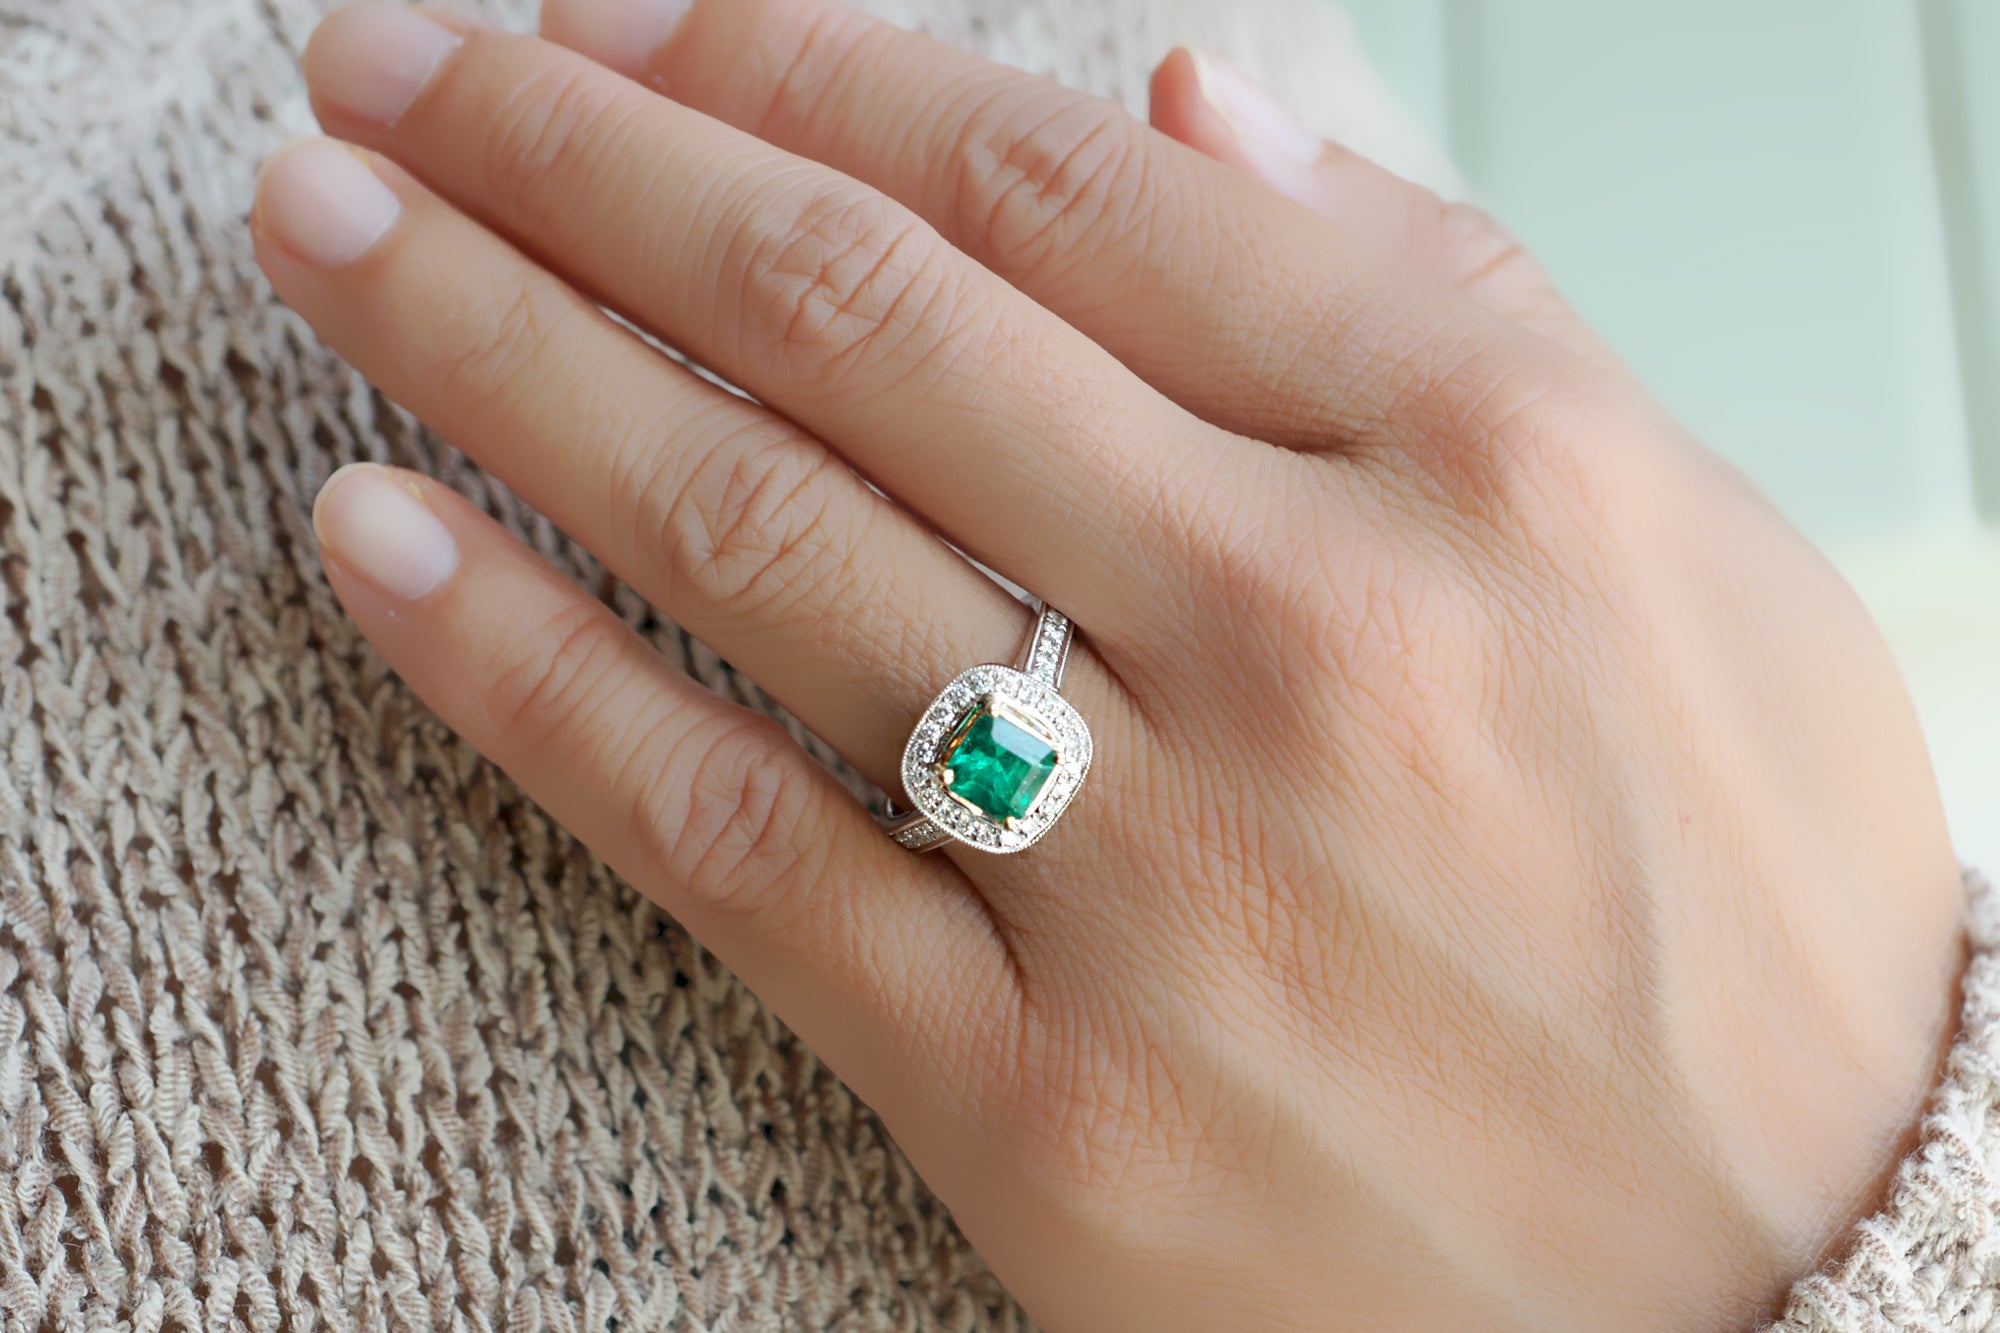 The Edith Square Emerald Ring (1.72ct. tw.)